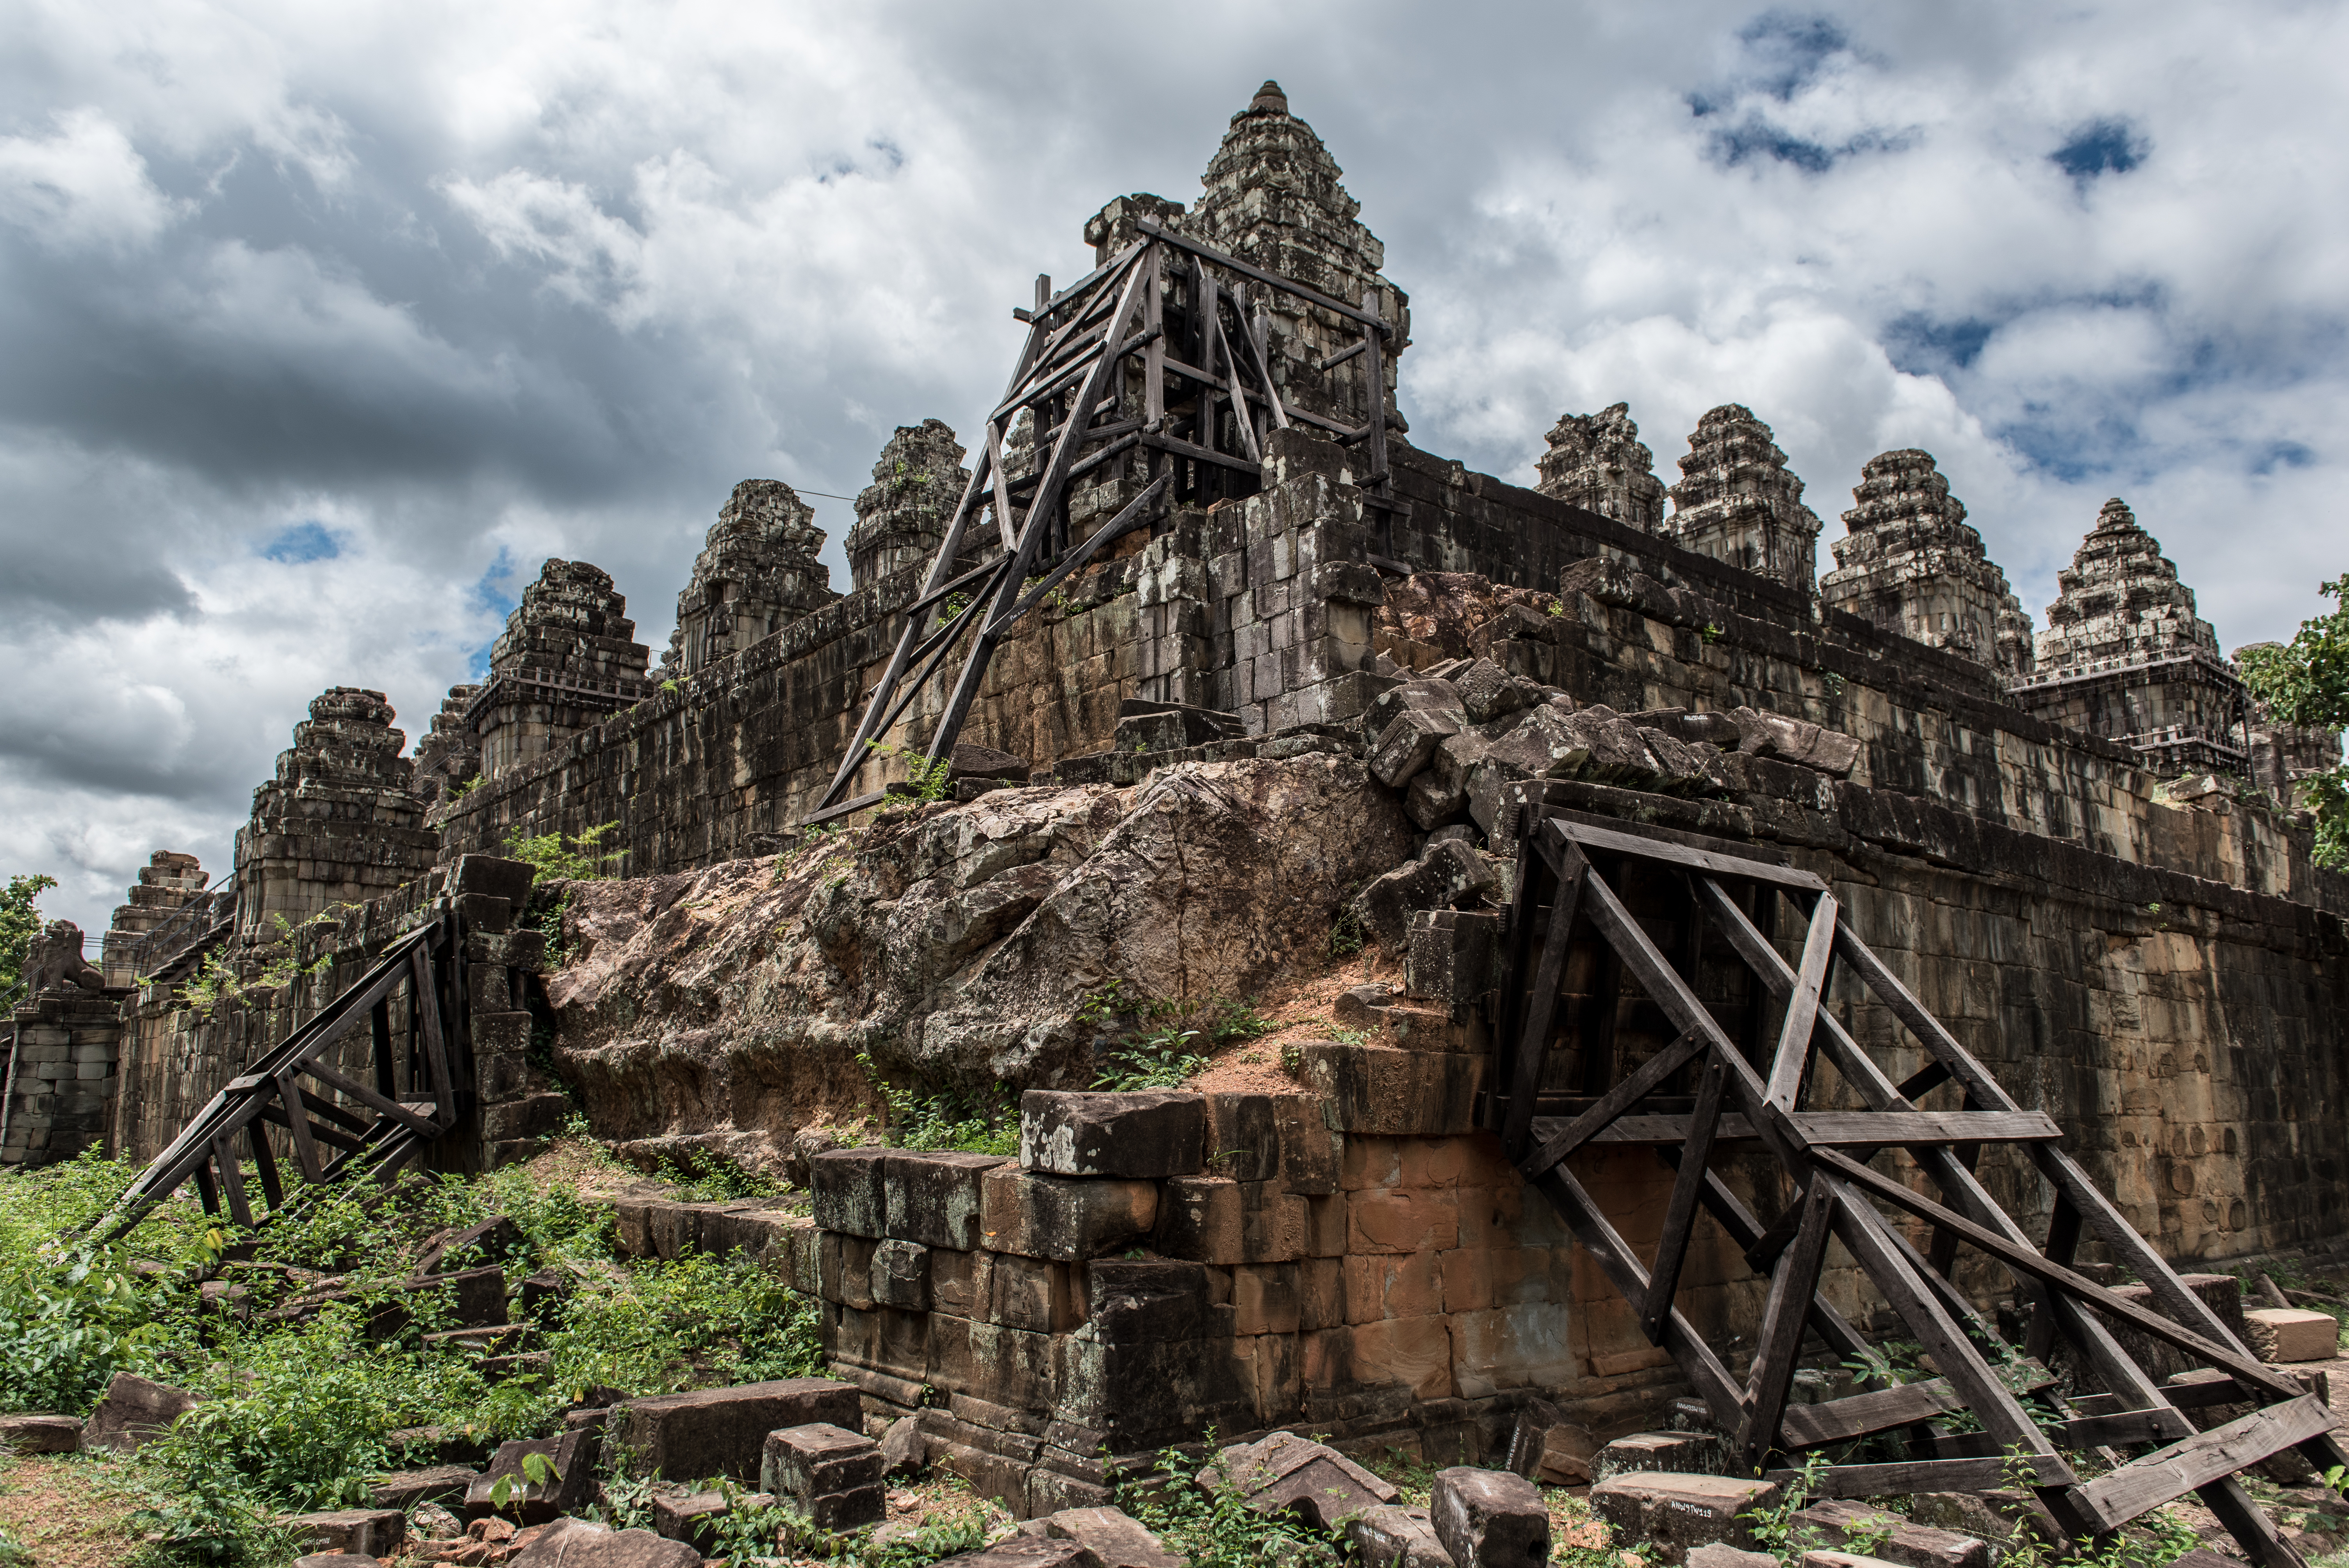 A view of the western half of Phnom Bakheng, to be restored. A view of the conserved eastern half of Phnom Bakheng. Photo by Amine Birdouz.